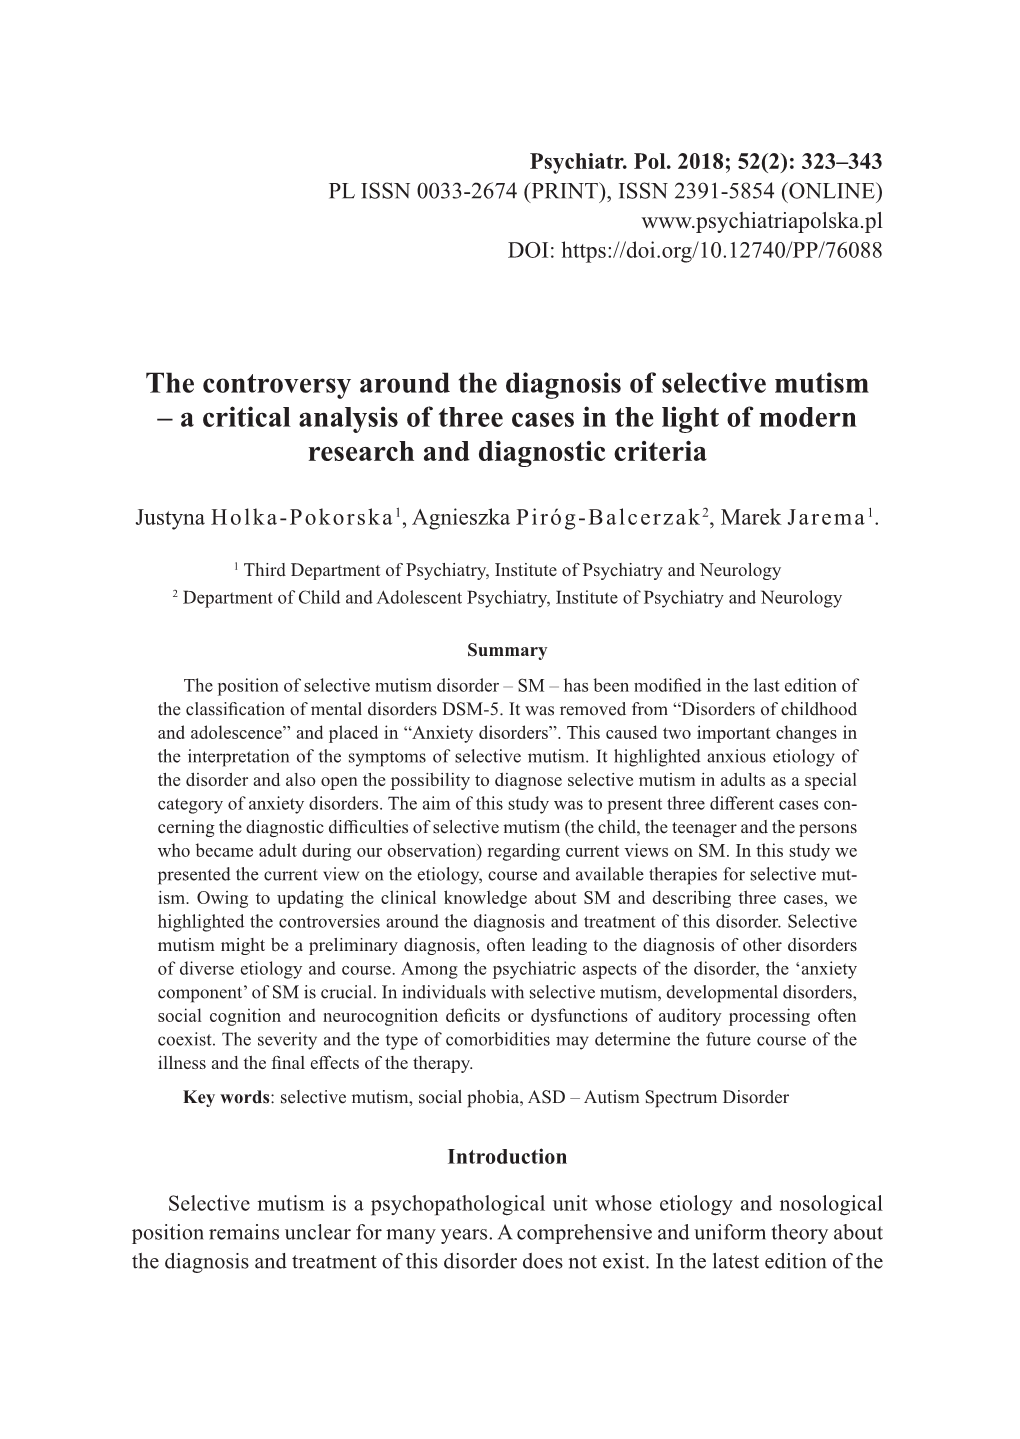 The Controversy Around the Diagnosis of Selective Mutism – a Critical Analysis of Three Cases in the Light of Modern Research and Diagnostic Criteria